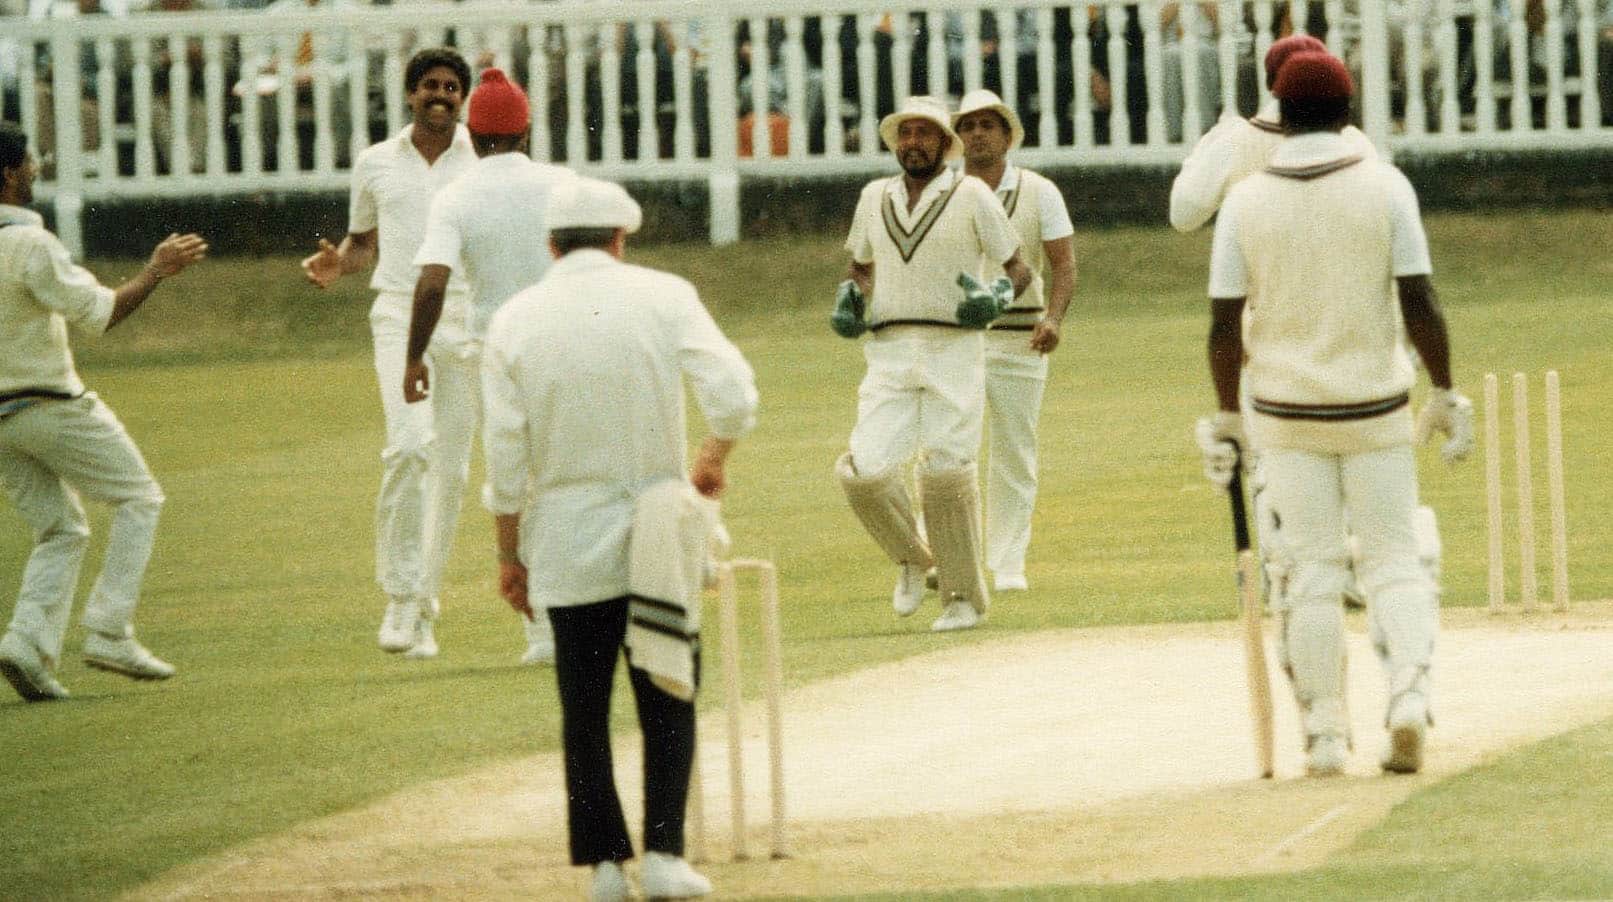 Rare pics of India's 1983 World Cup final win over West Indies at Lord